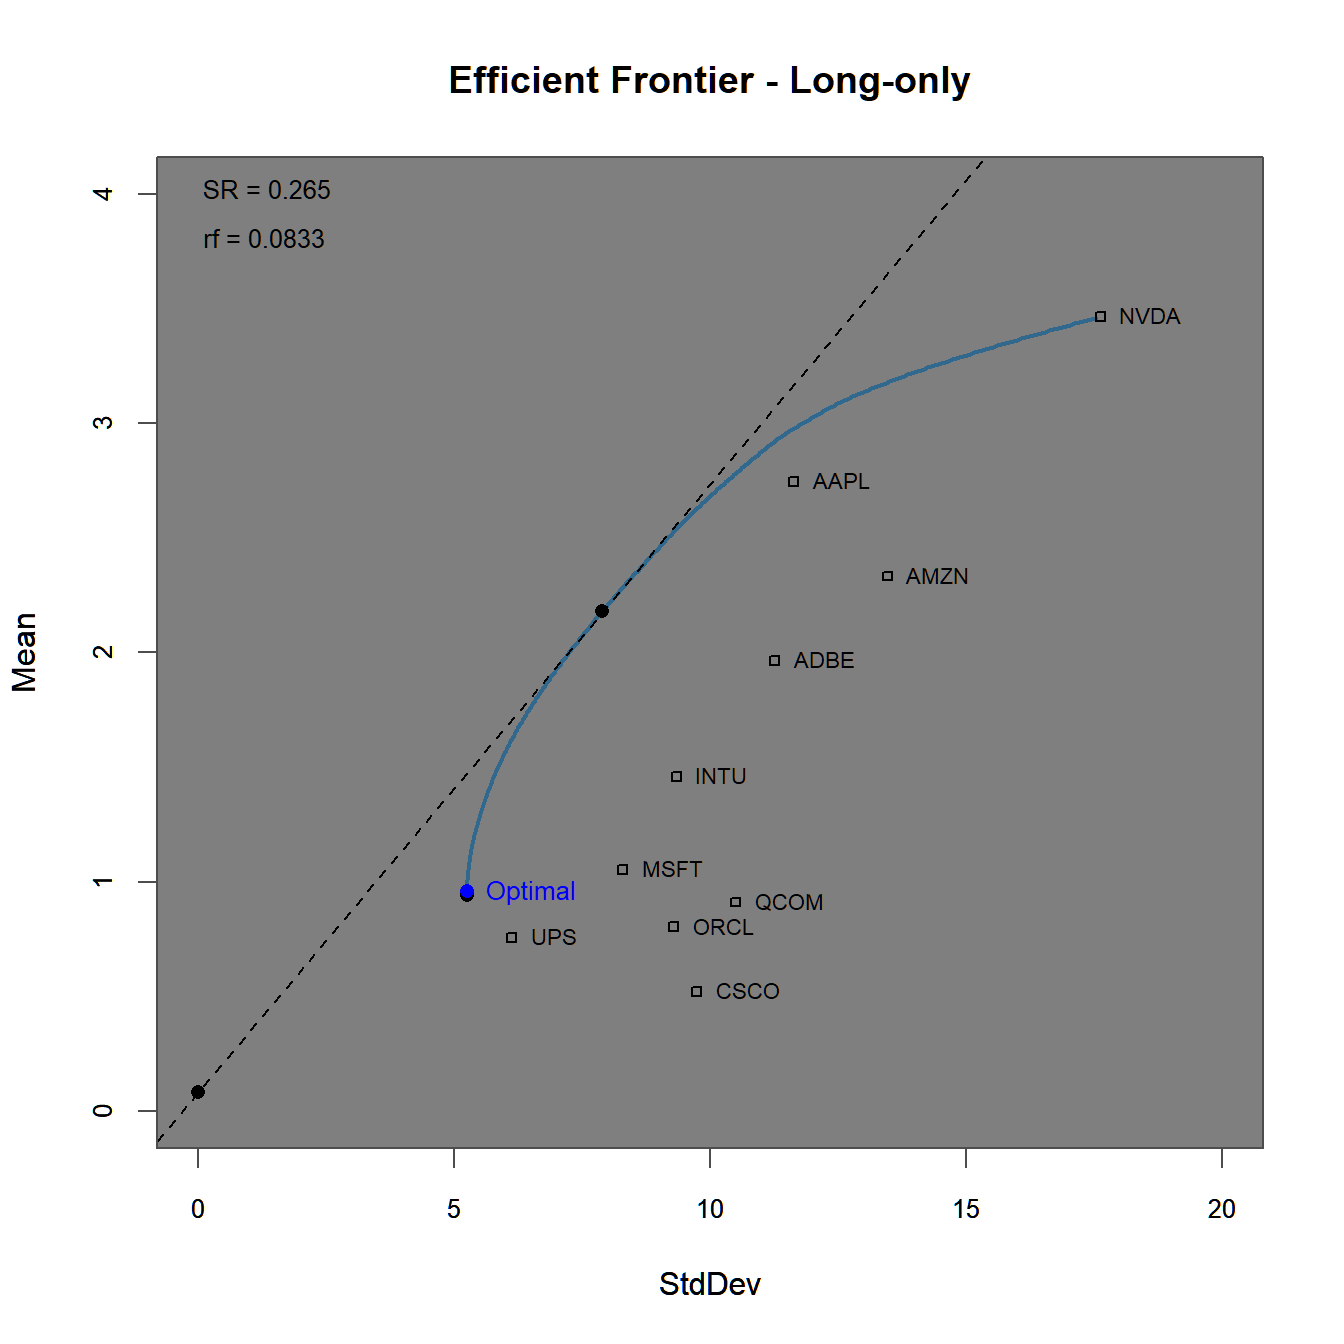 Efficient frontier and optimal portfolios for the using a long-only constraint.